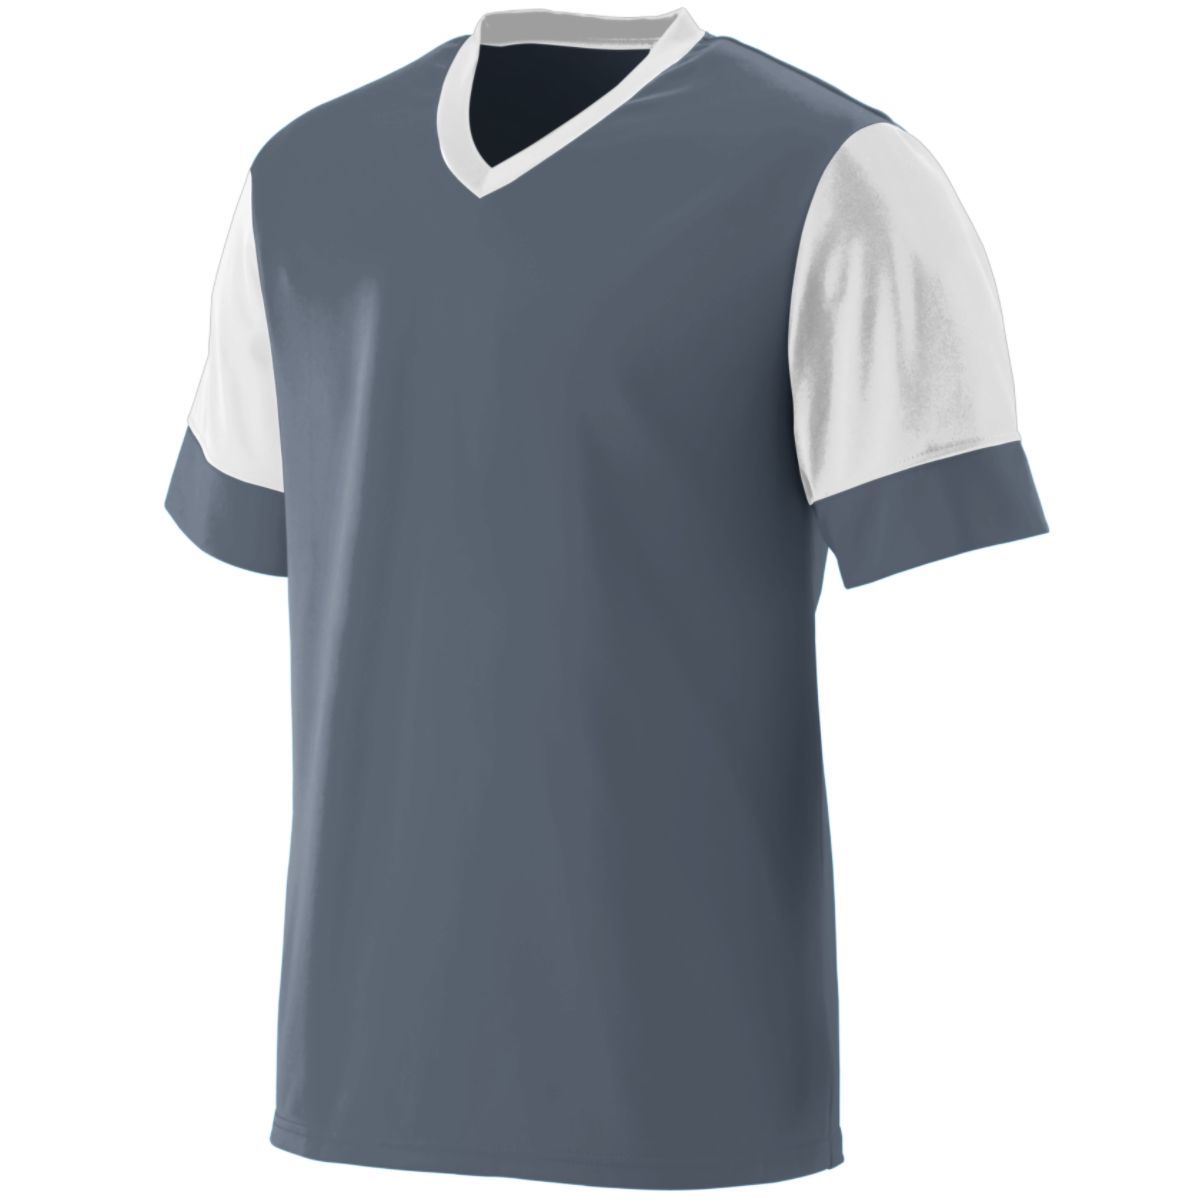 Augusta Sportswear Youth Lightning Jersey in Graphite/White  -Part of the Youth, Youth-Jersey, Augusta-Products, Soccer, Shirts, All-Sports-1 product lines at KanaleyCreations.com